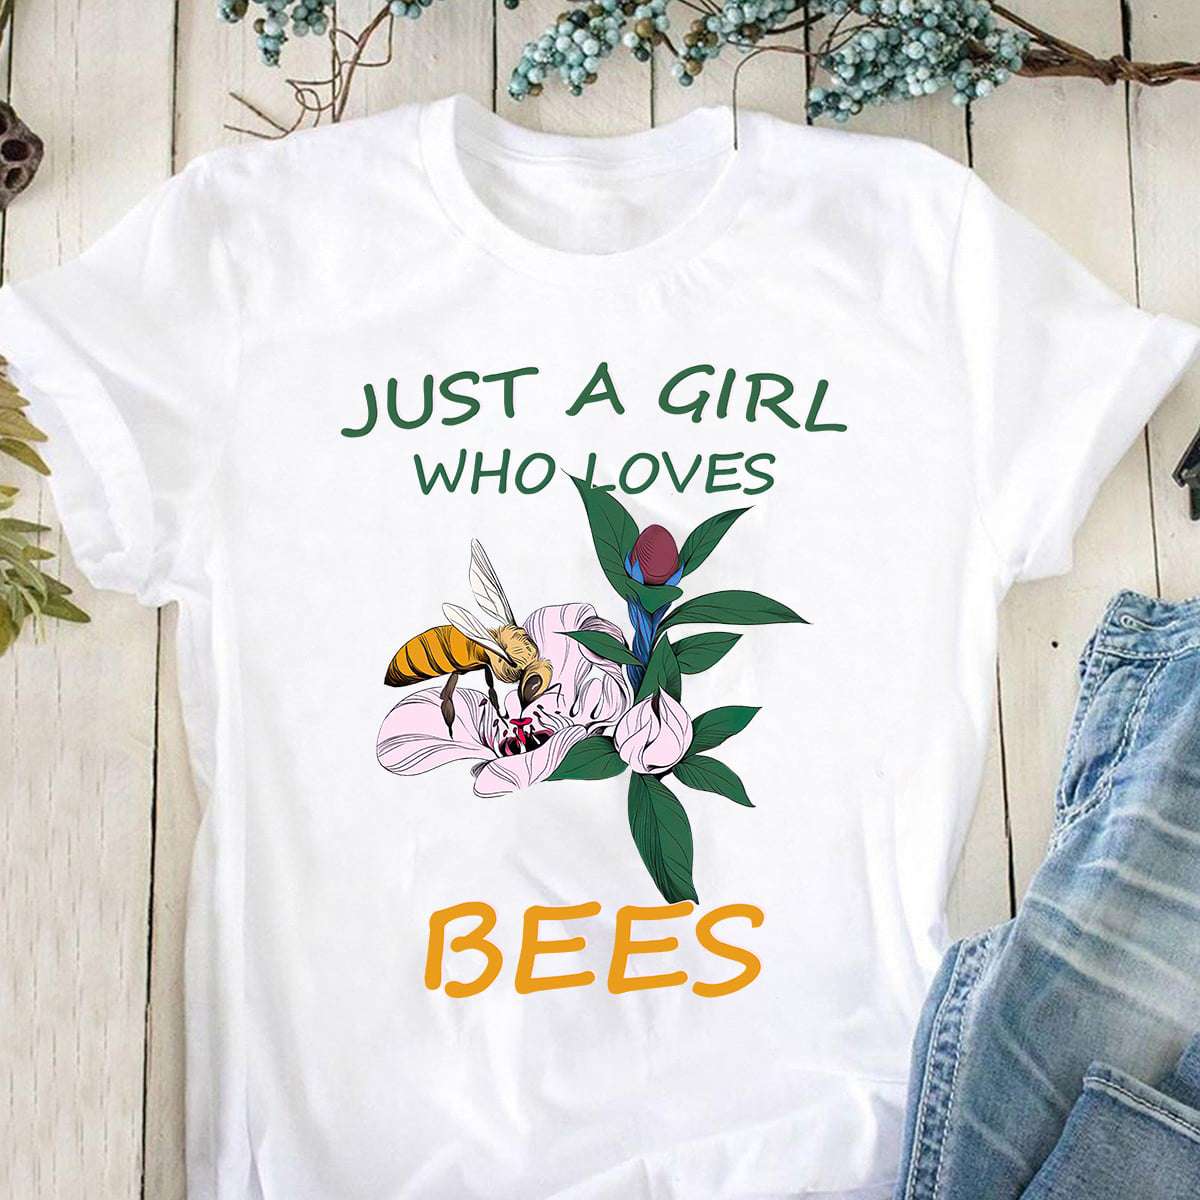 Just a girl who loves bees - Bee and flower, bee the animal